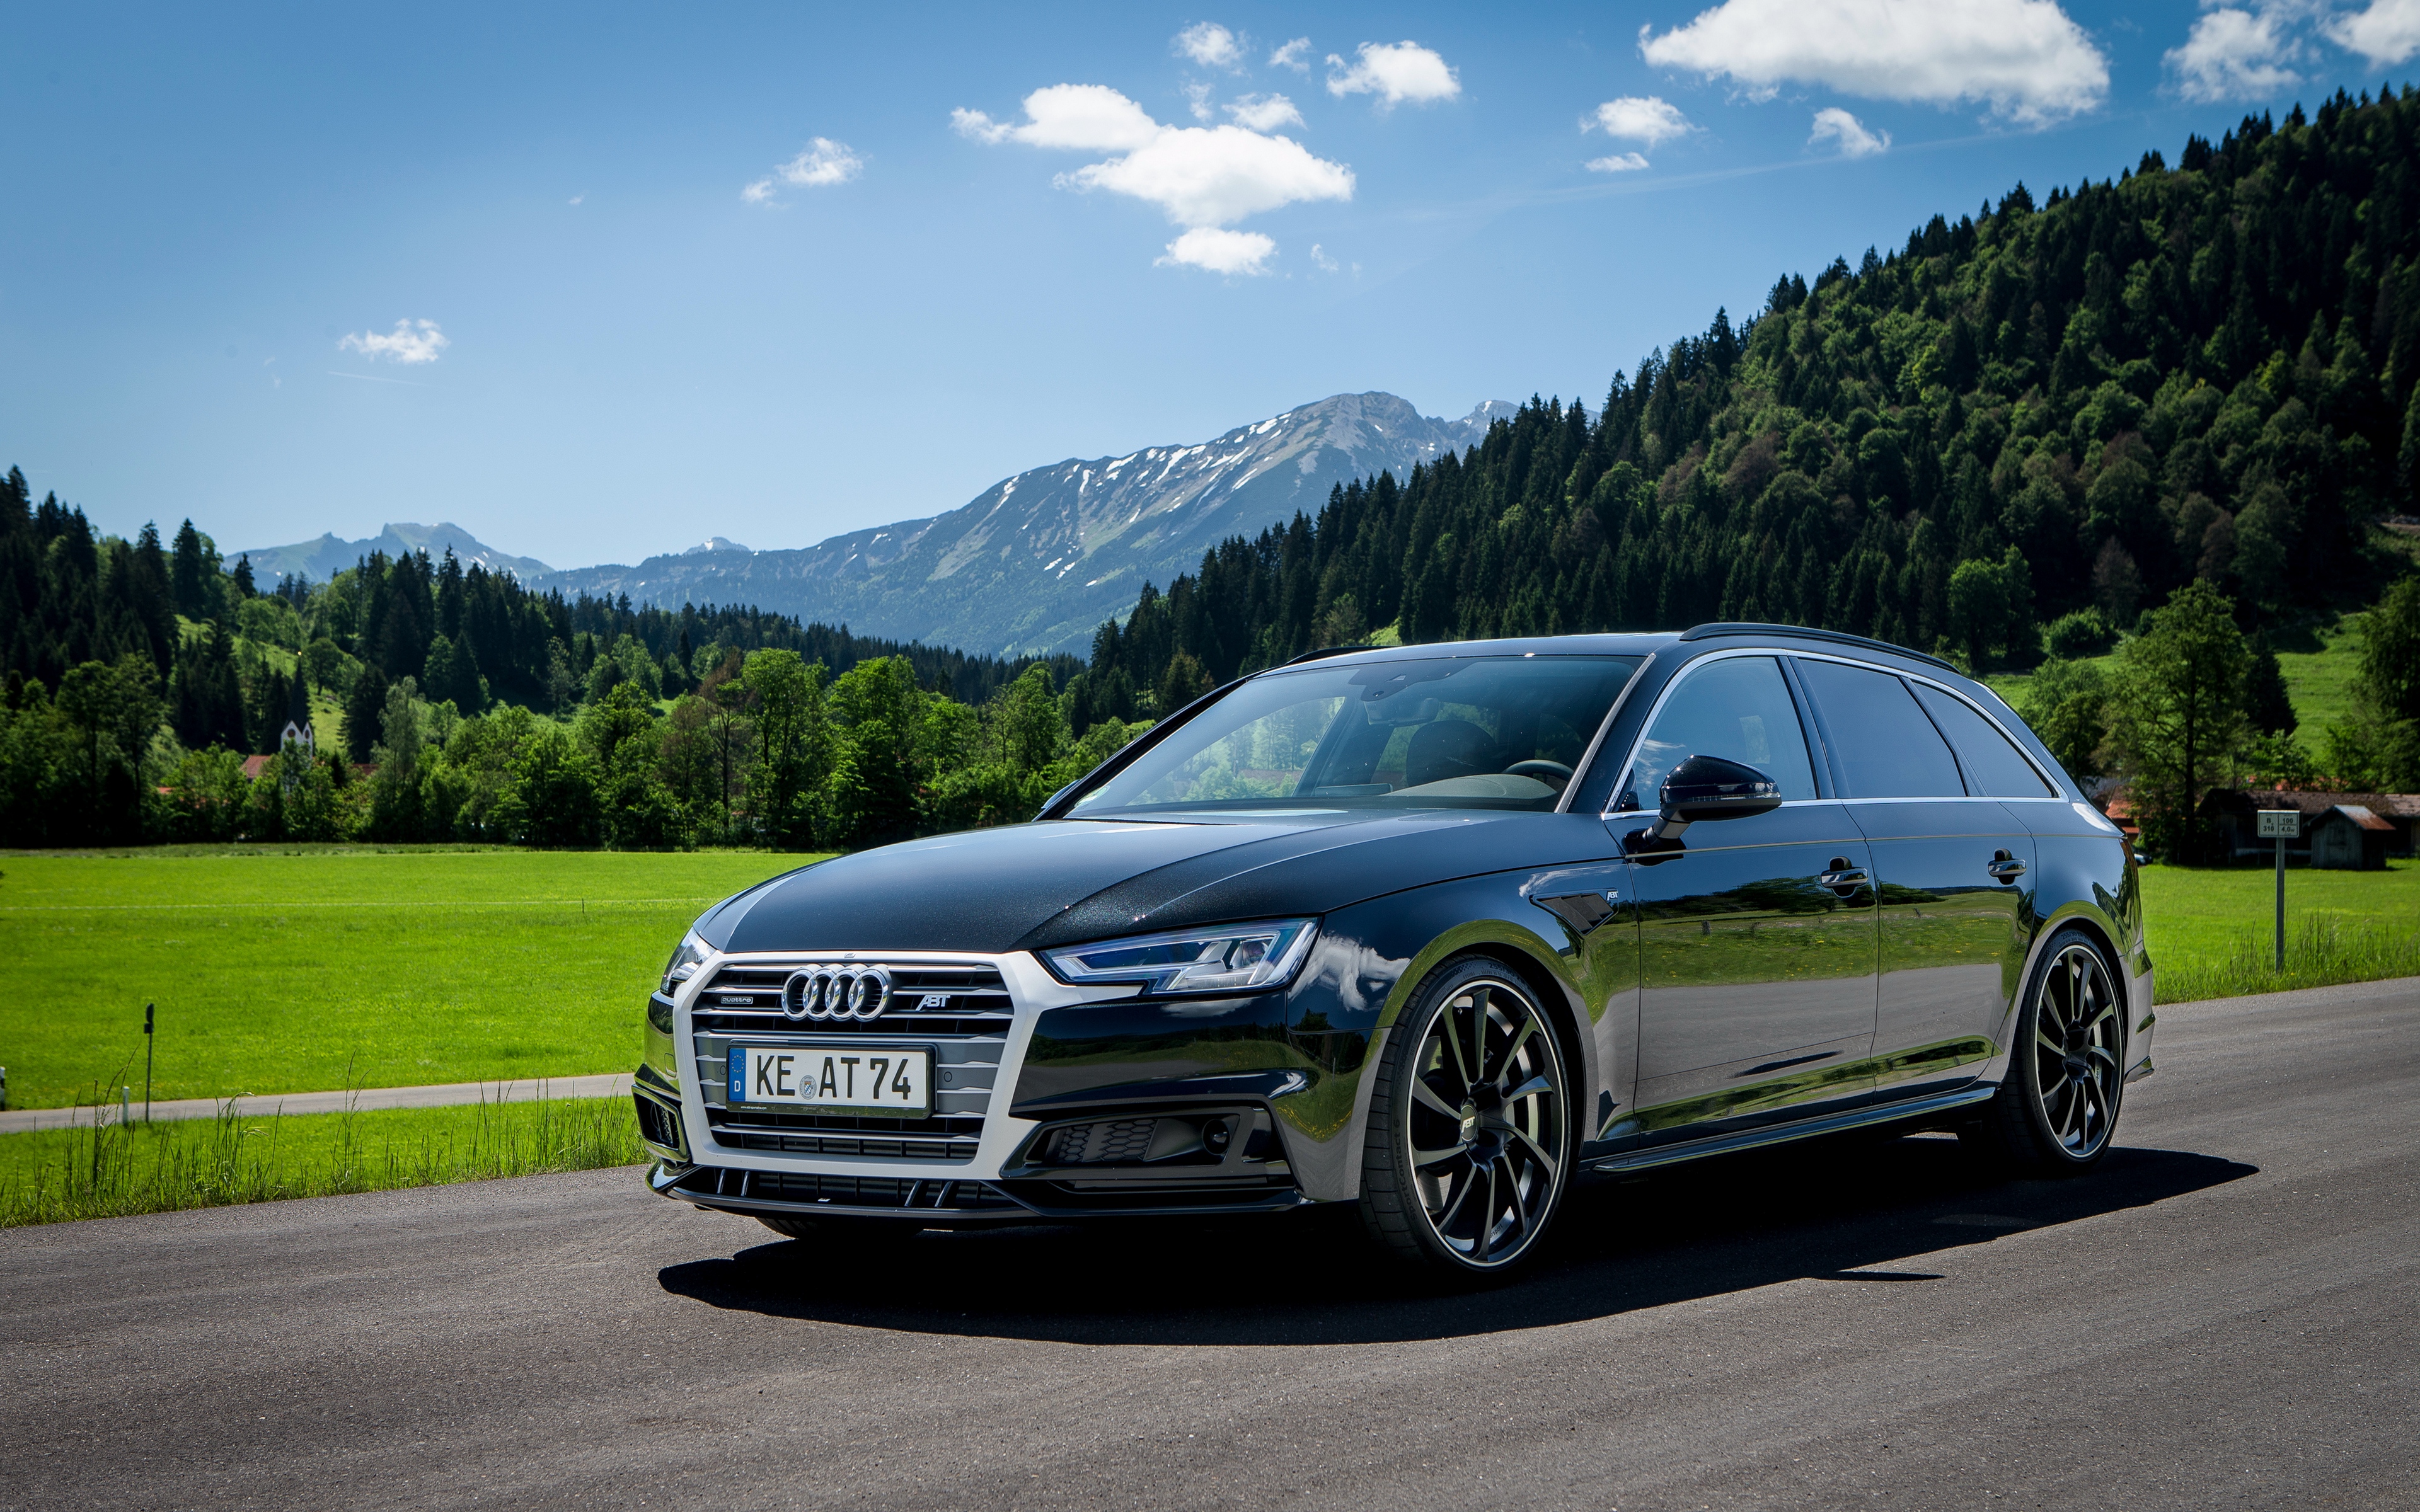 General 3840x2400 car tuning vehicle road mountains Audi Audi A4 ABT station wagon German cars Volkswagen Group